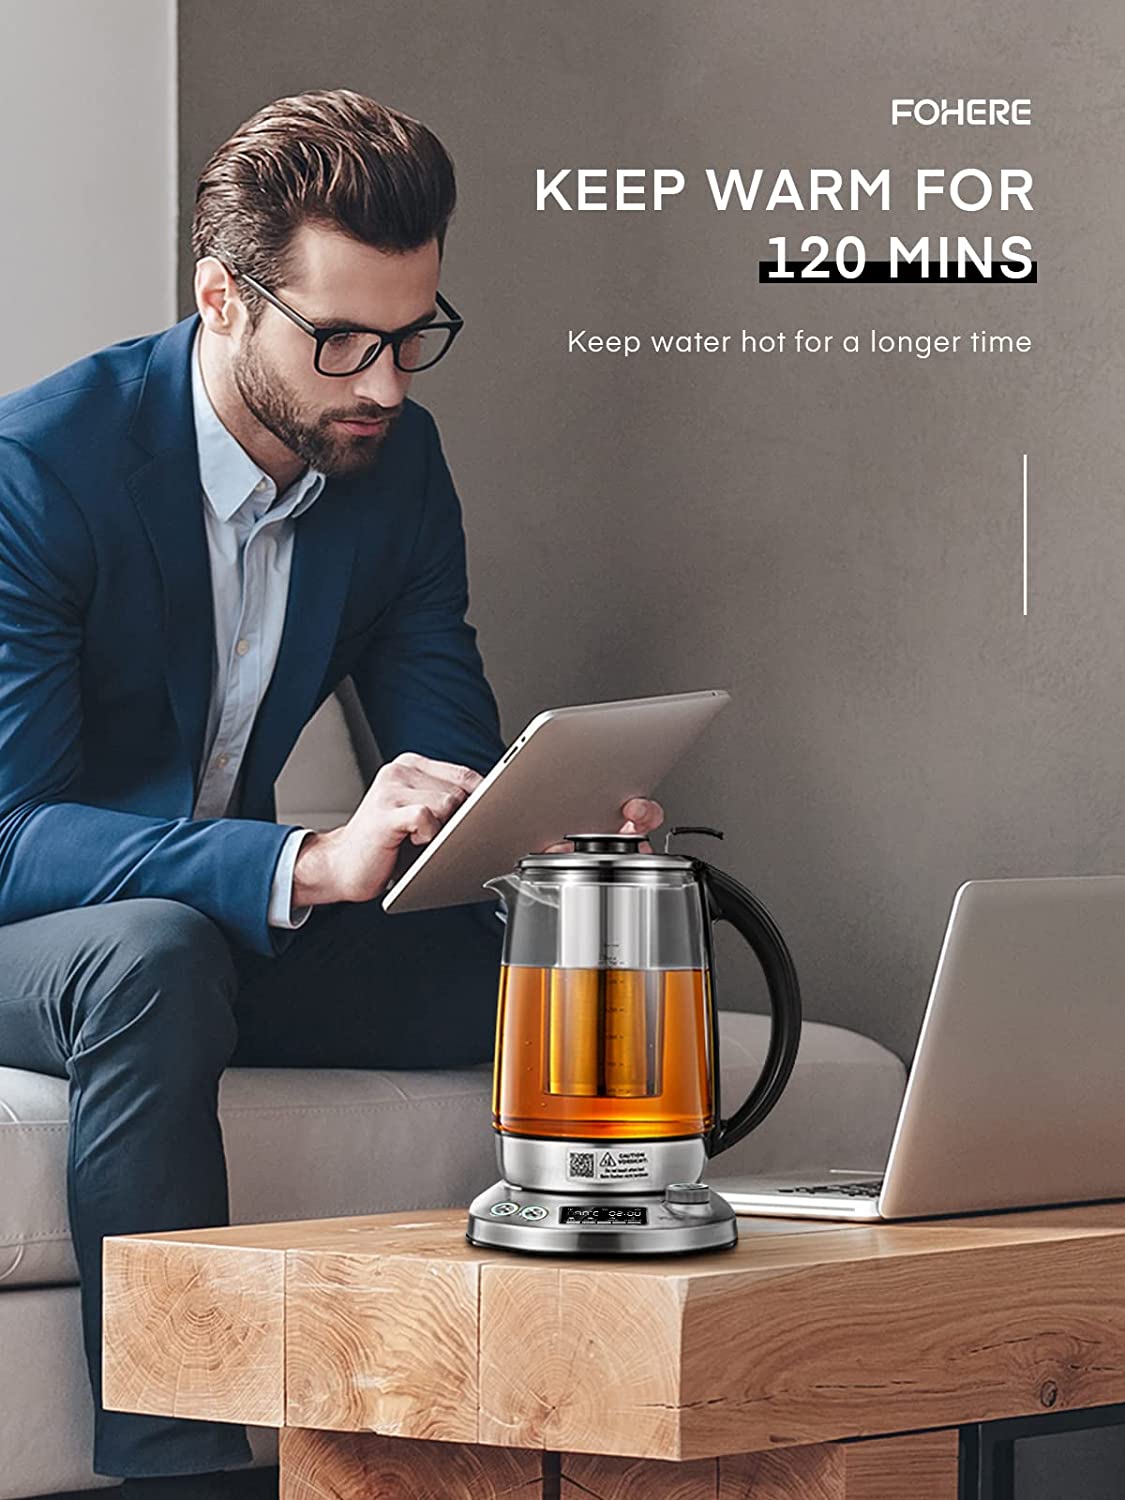 Mecity Tea Kettle Electric Tea Pot with Removable Infuser, 9 Preset Brewing Programs Tea Maker with Temprature Control, 2 Hours Keep Warm, 1.7 Liter